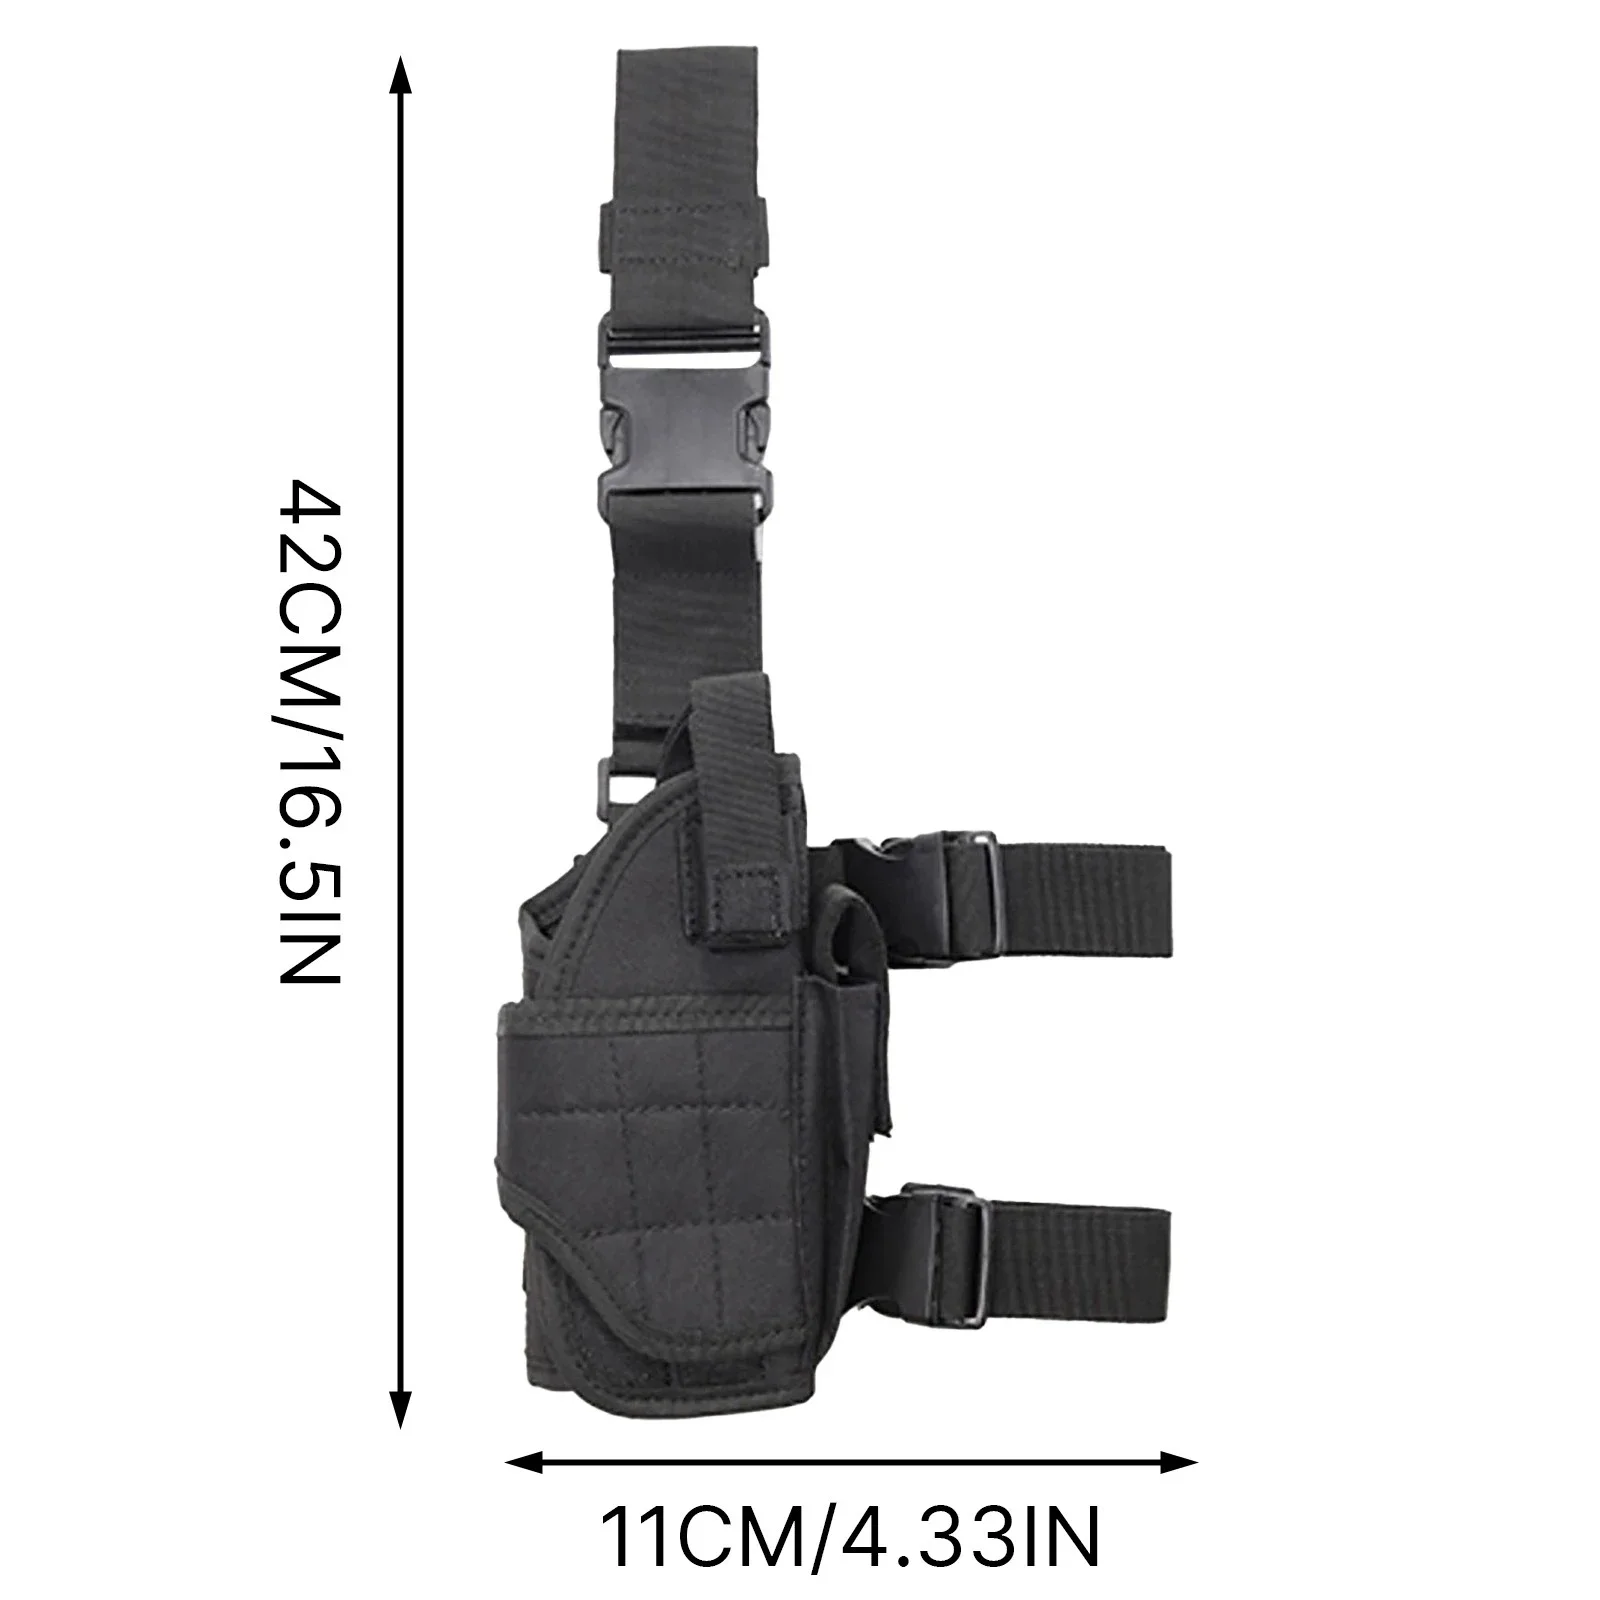 New CS Tactical Gun Holster Right Handed Tactical Thigh Pistol Bag Pouch Legs Harness For All Handguns Hunting Accessory